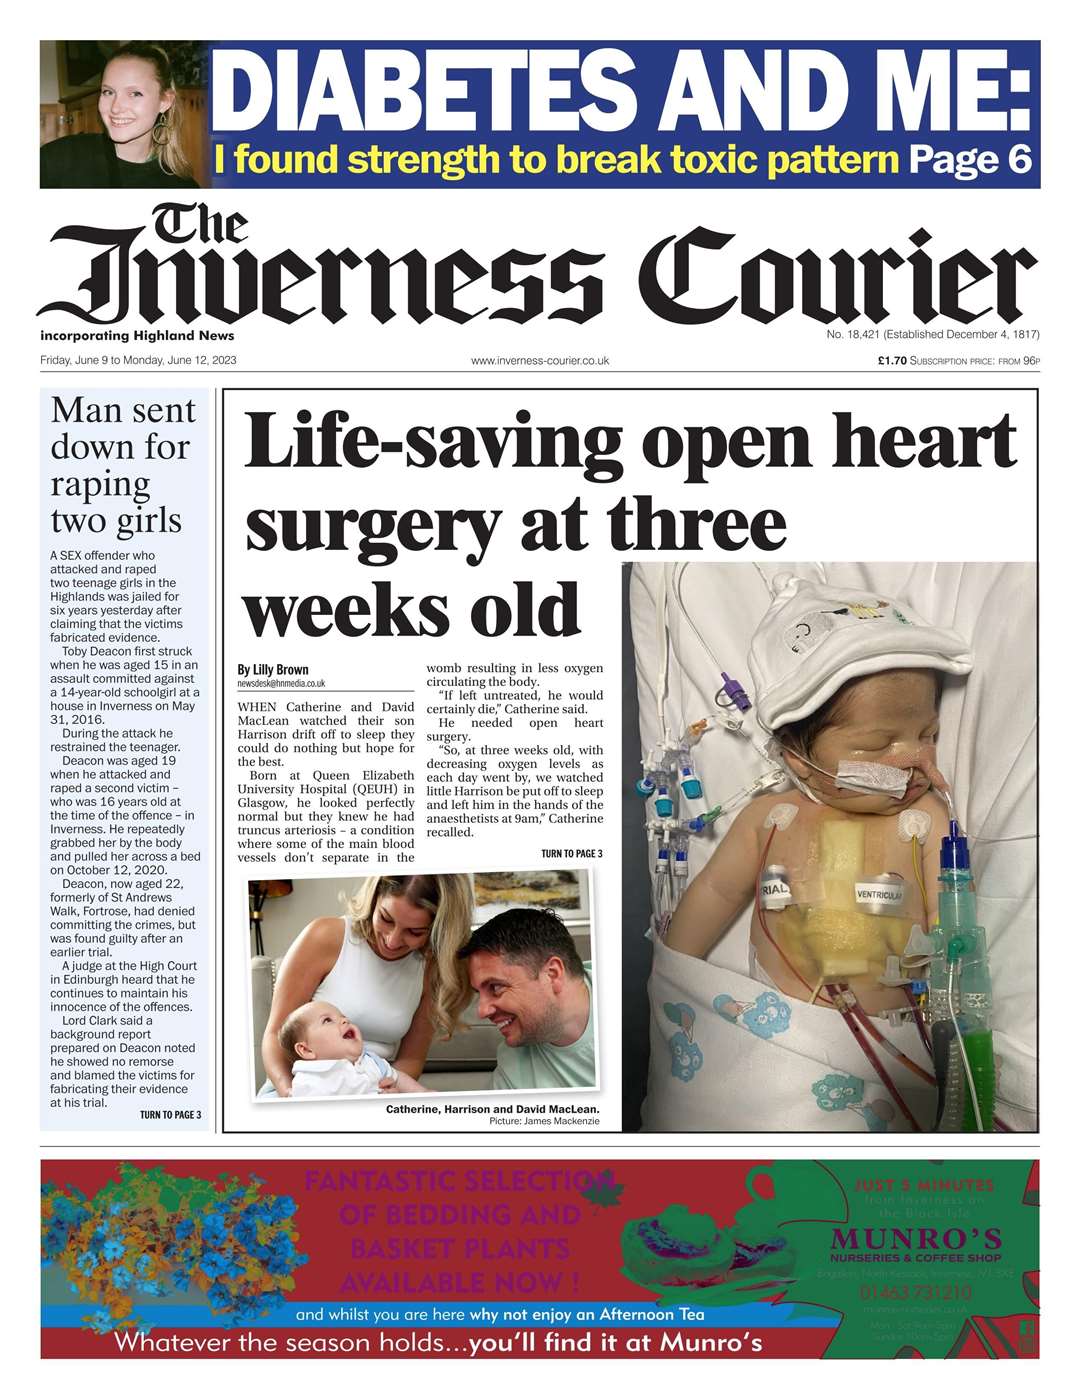 The Inverness Courier, June 9, front page.